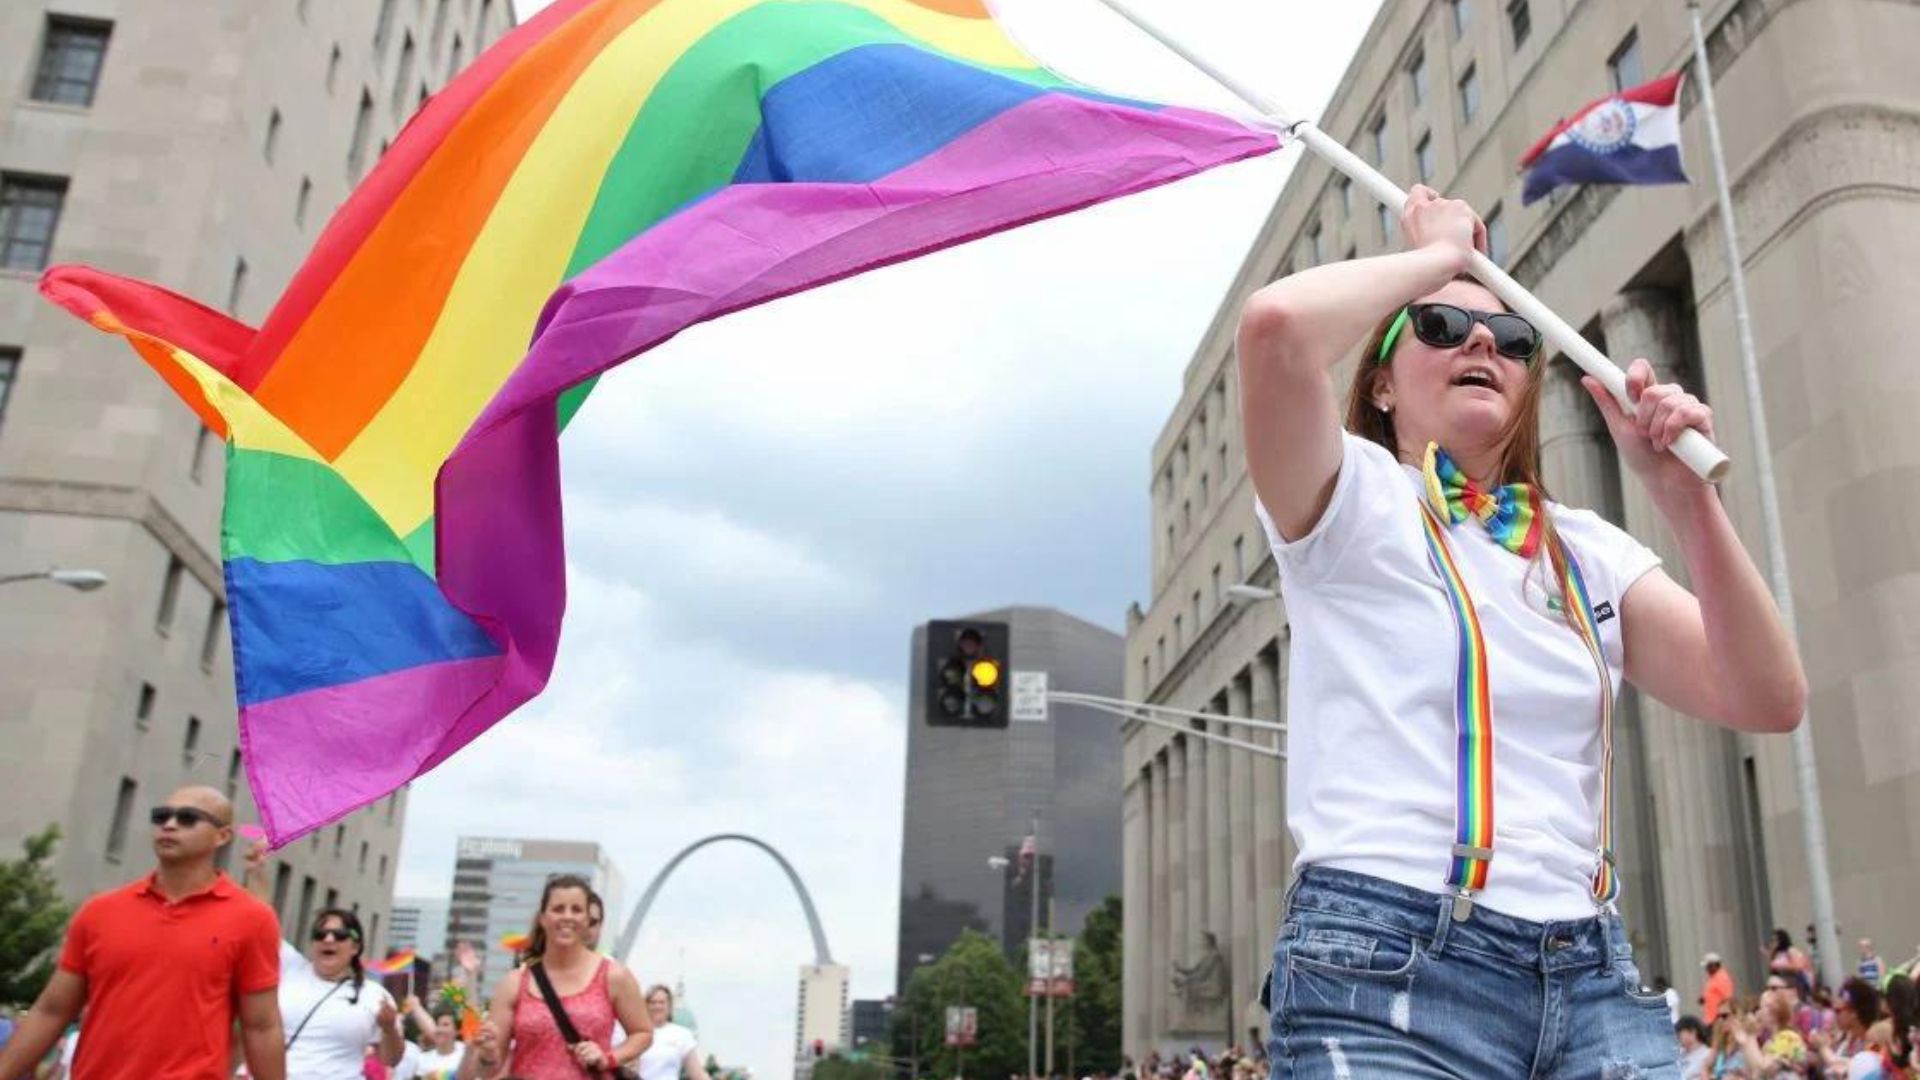 PrideFest in St. Louis includes a colorful parade along Market Street.